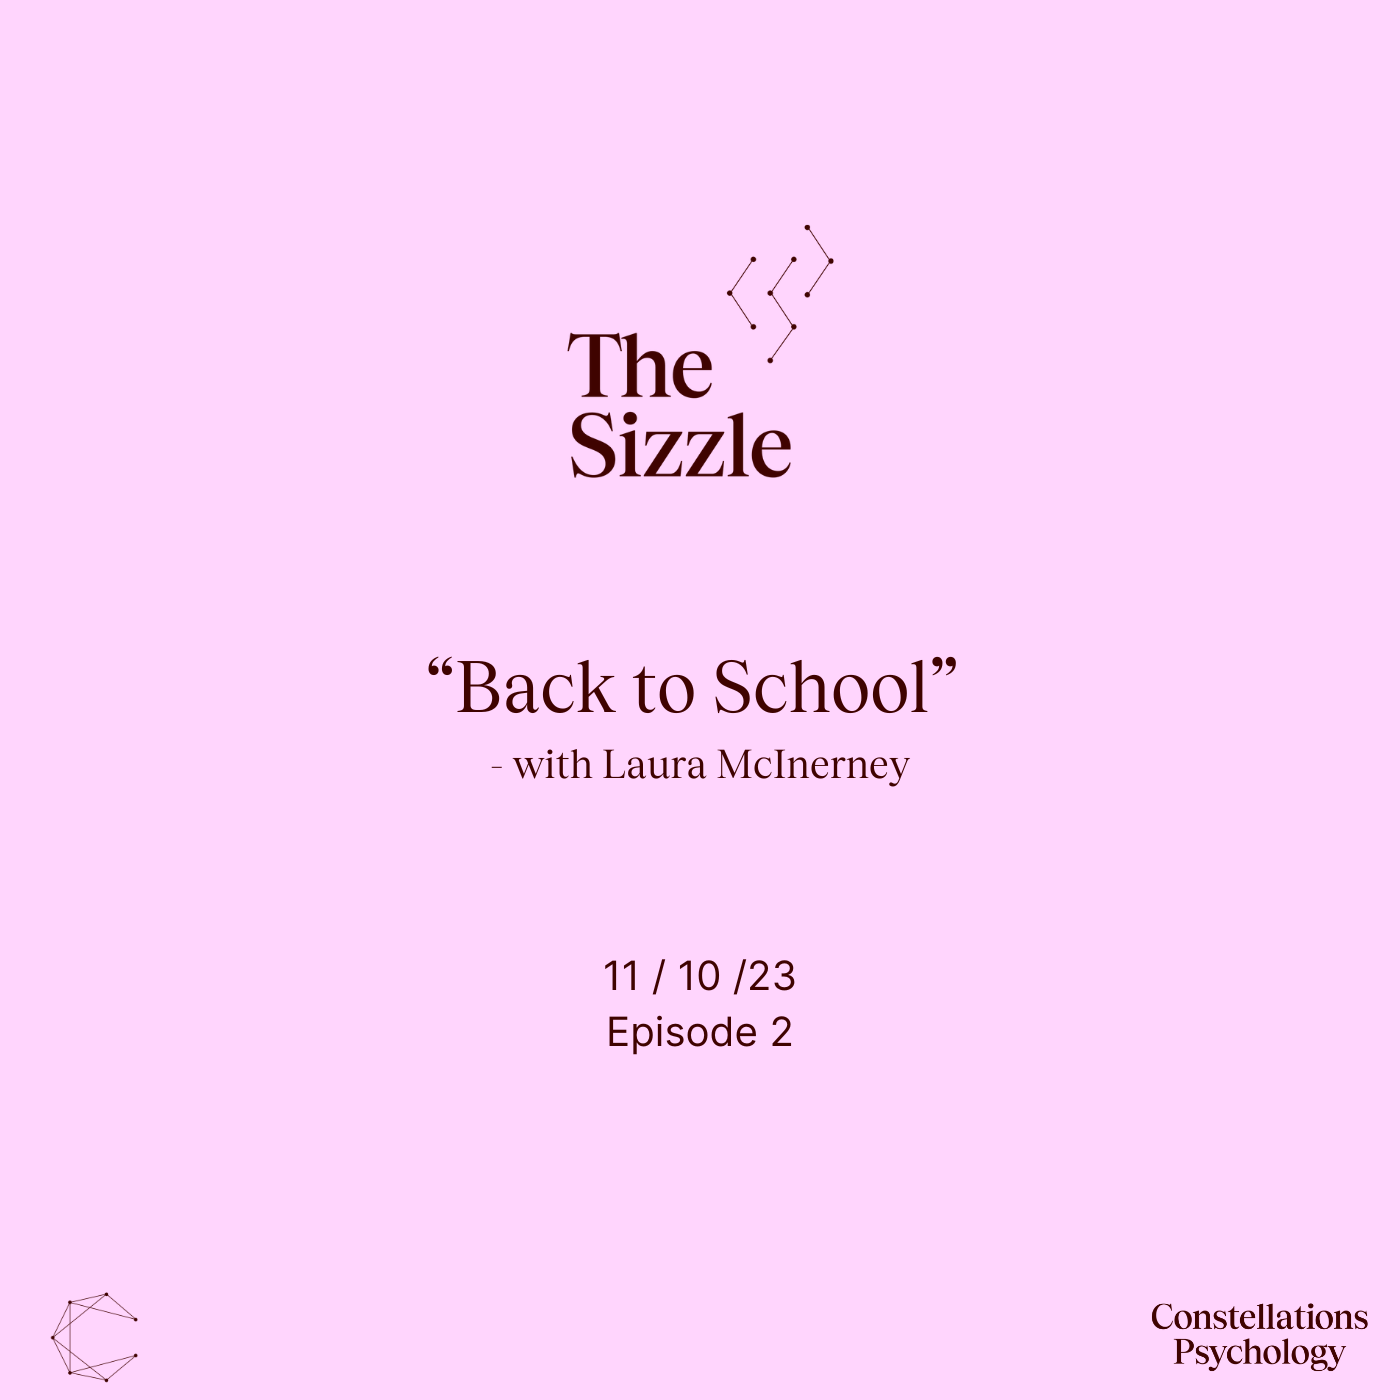 BACK TO SCHOOL with Laura McInerney [Episode 2]